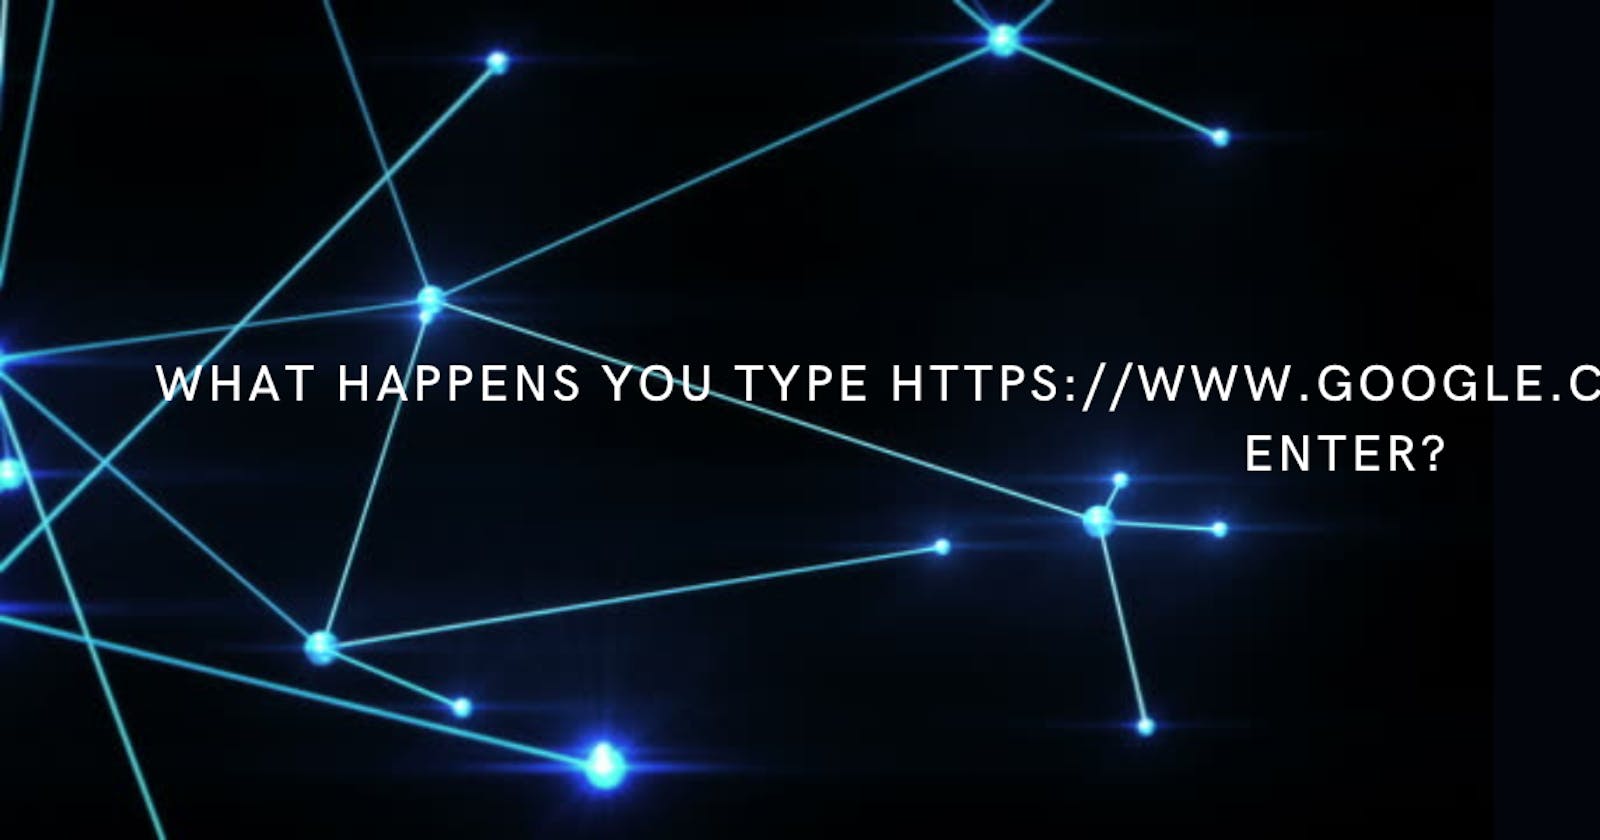 What happens you type https://www.google.com in your browser and press Enter?